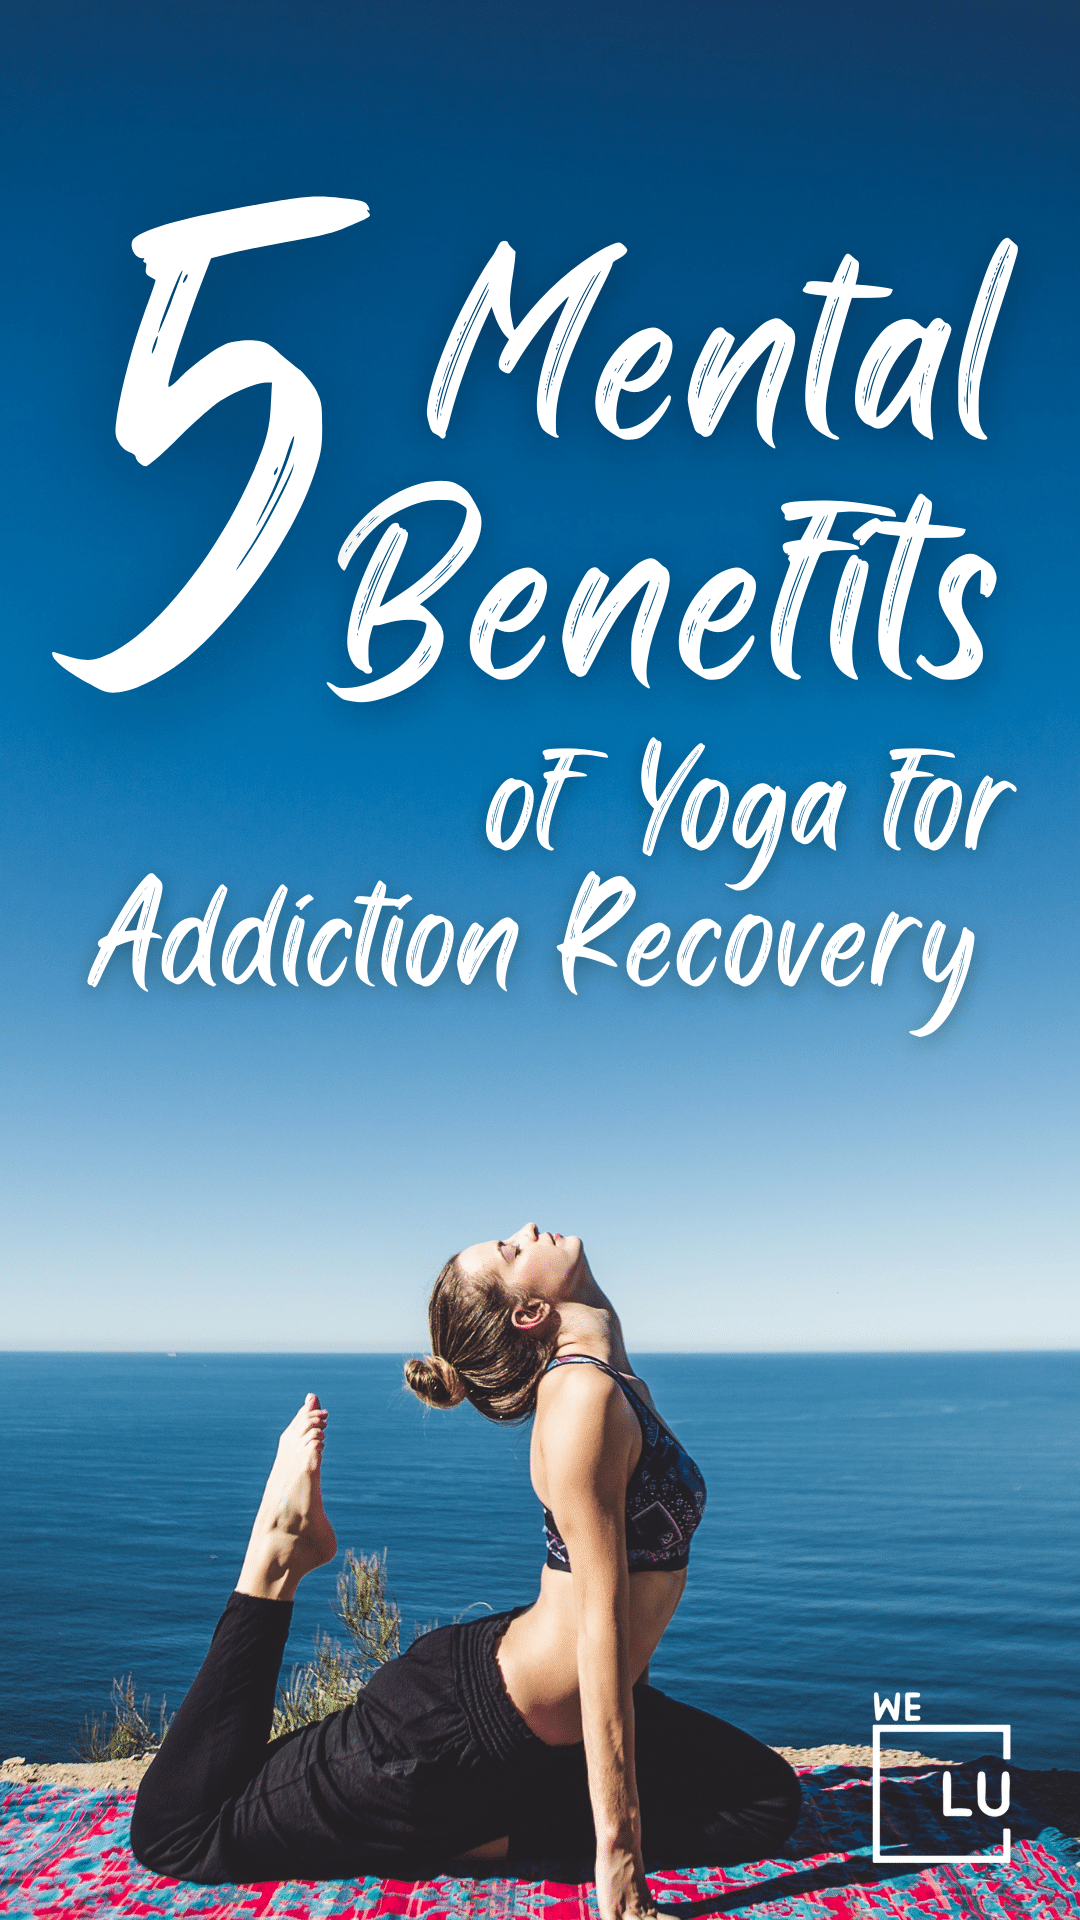 Yoga Therapy for Drug & Alcohol Addiction Recovery